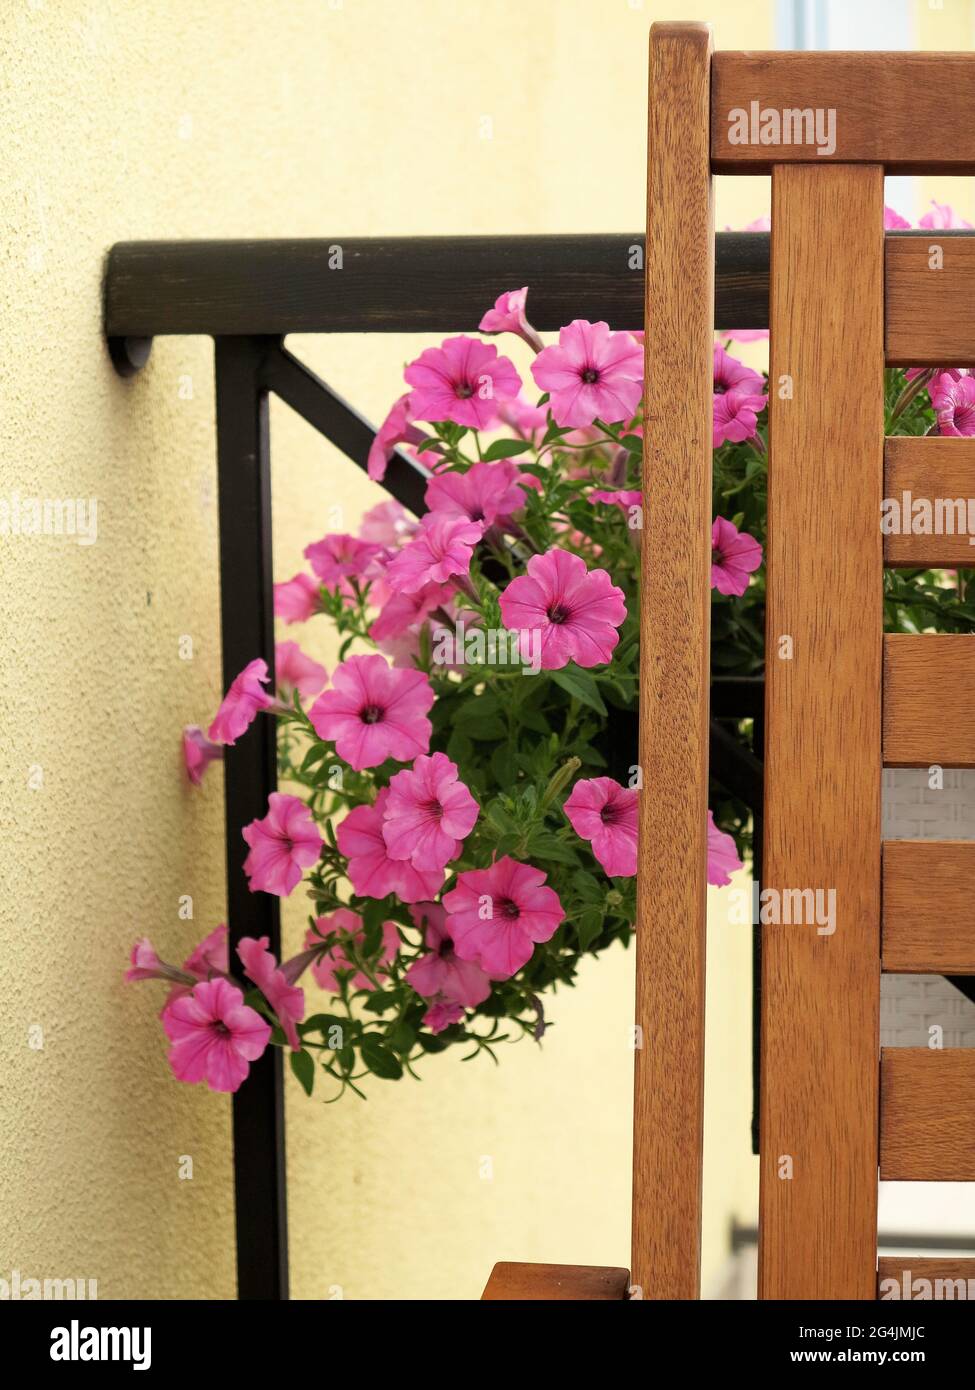 Blooming beautiful pink Petunia flowers and white watering can stands on table. Flowers on balcony Stock Photo